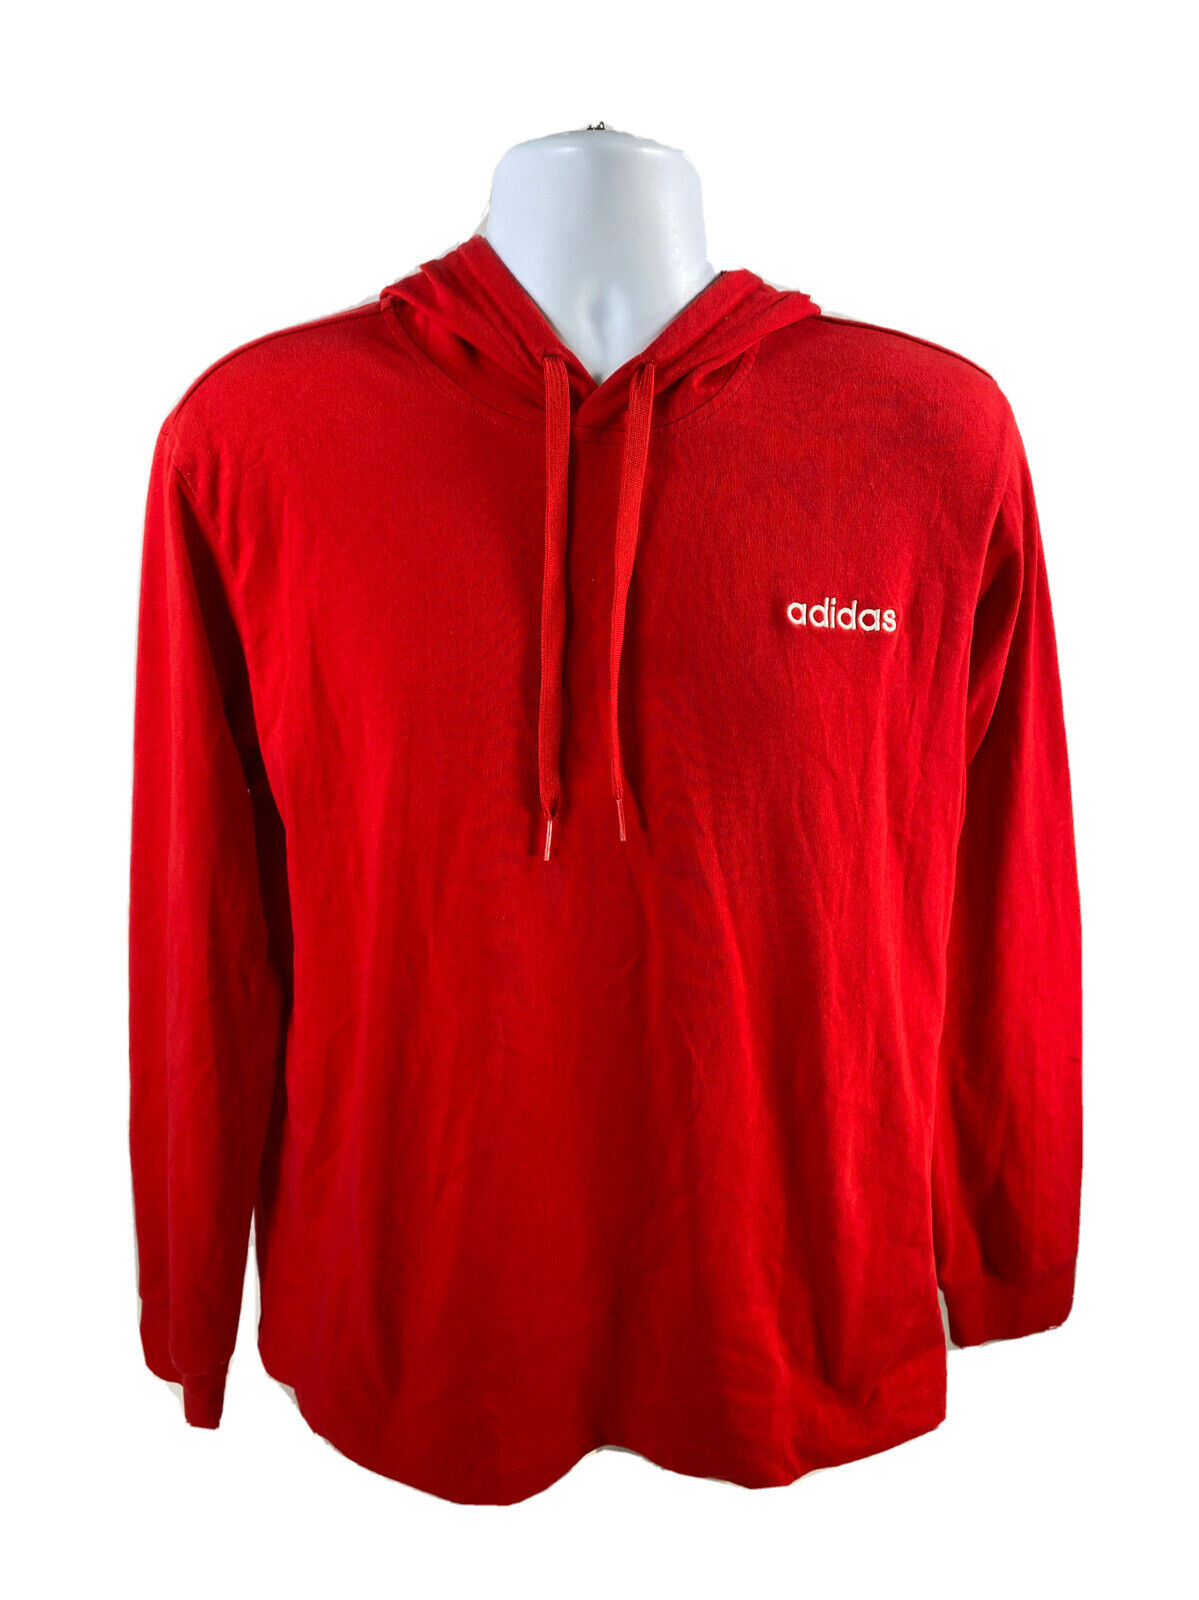 Adidas Men's Red Long Sleeve Lightweight Cotton Pullover Hoodie - L